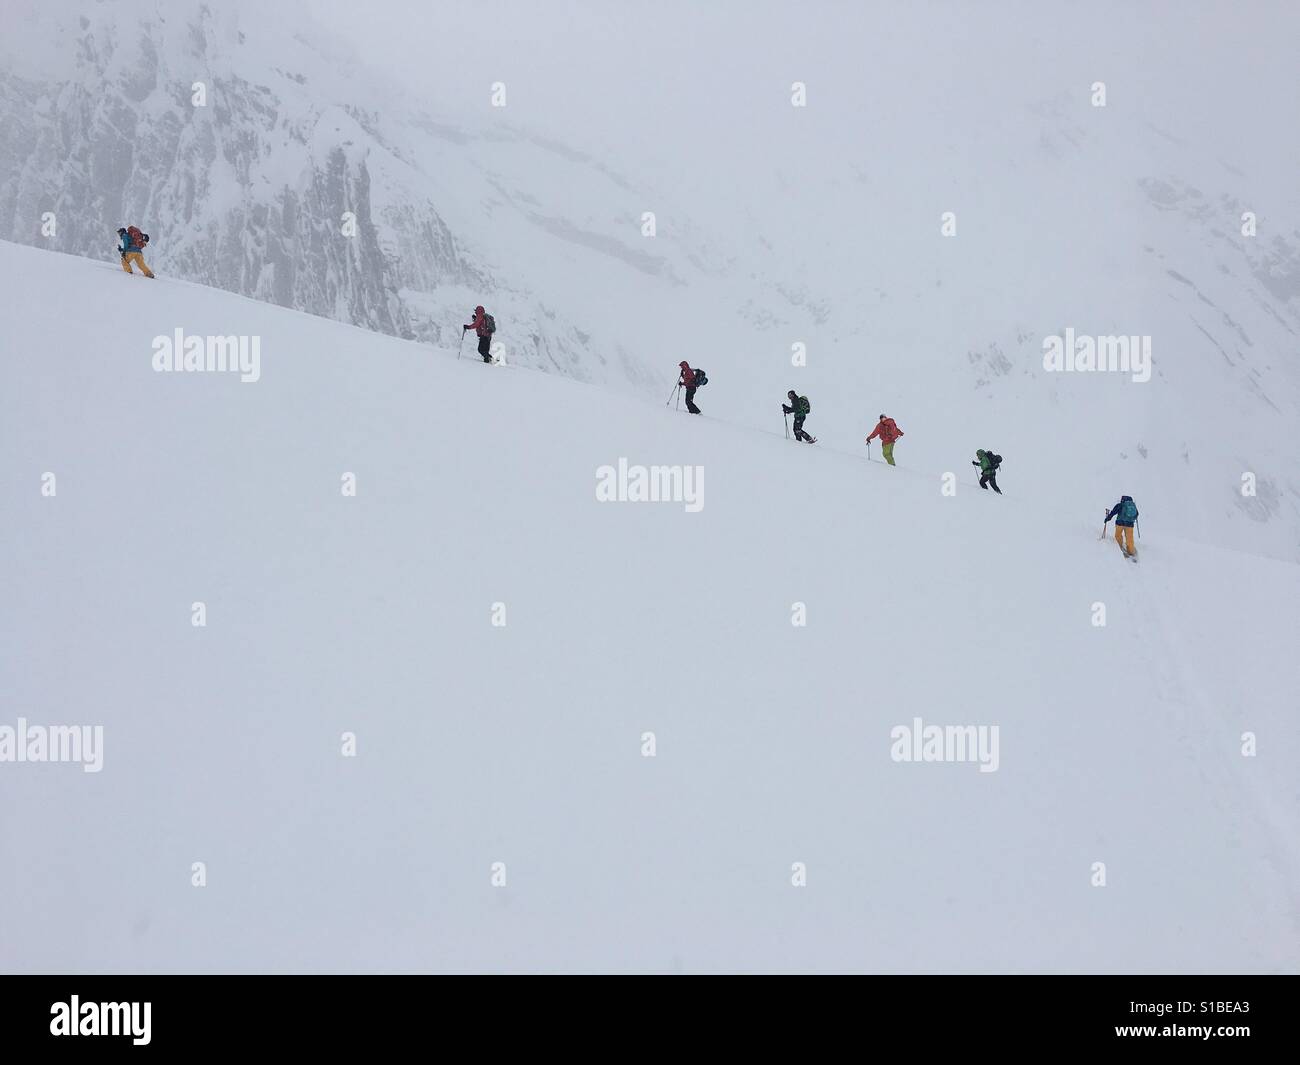 Ski mountaineering in the Canadian Rockies Stock Photo